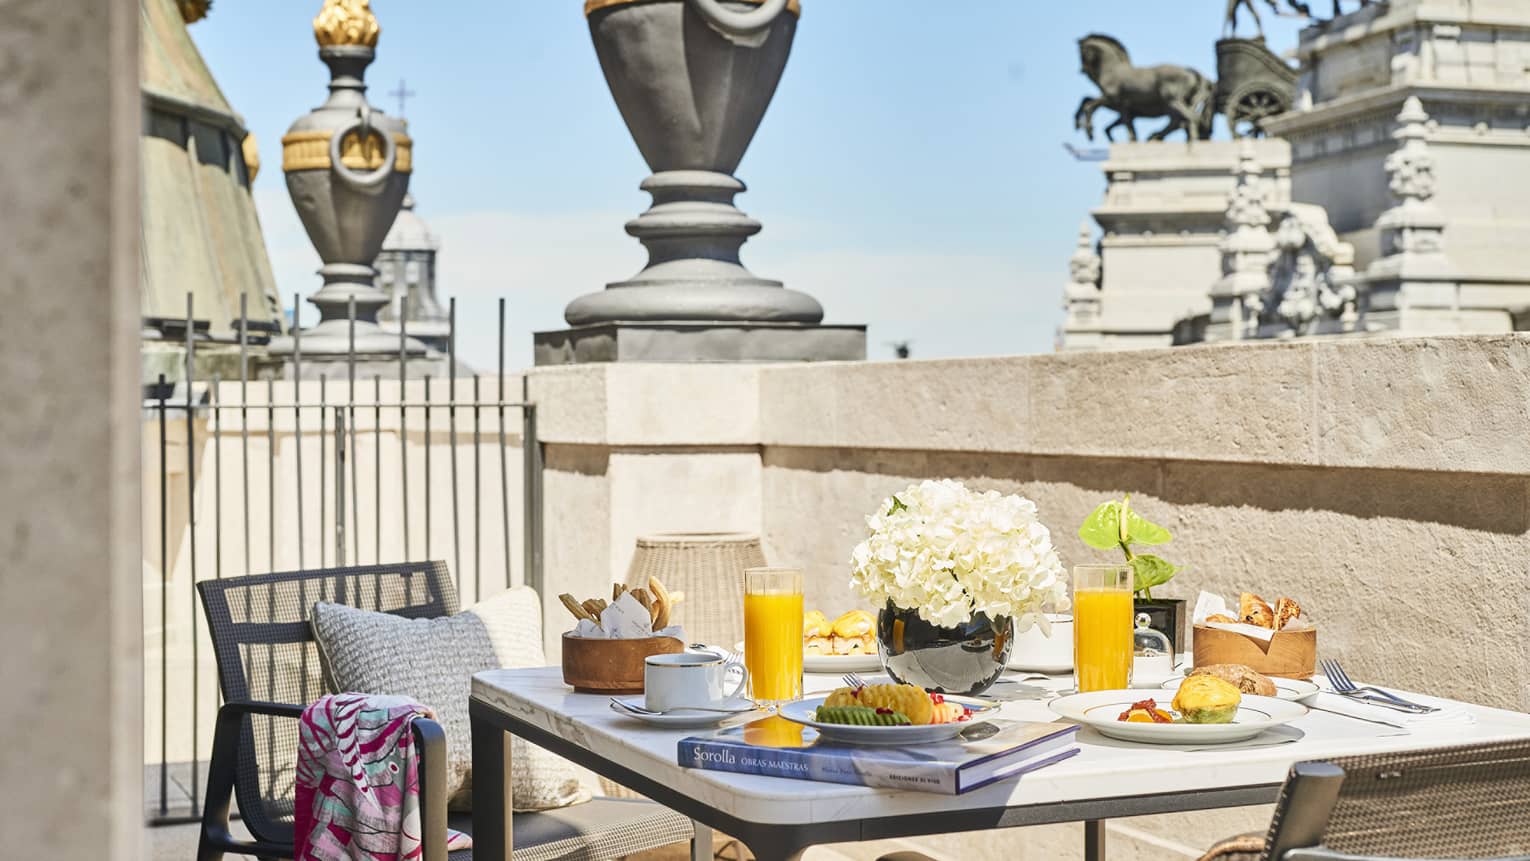 Dining table with two chairs on private terrace, with view of Madrid statue